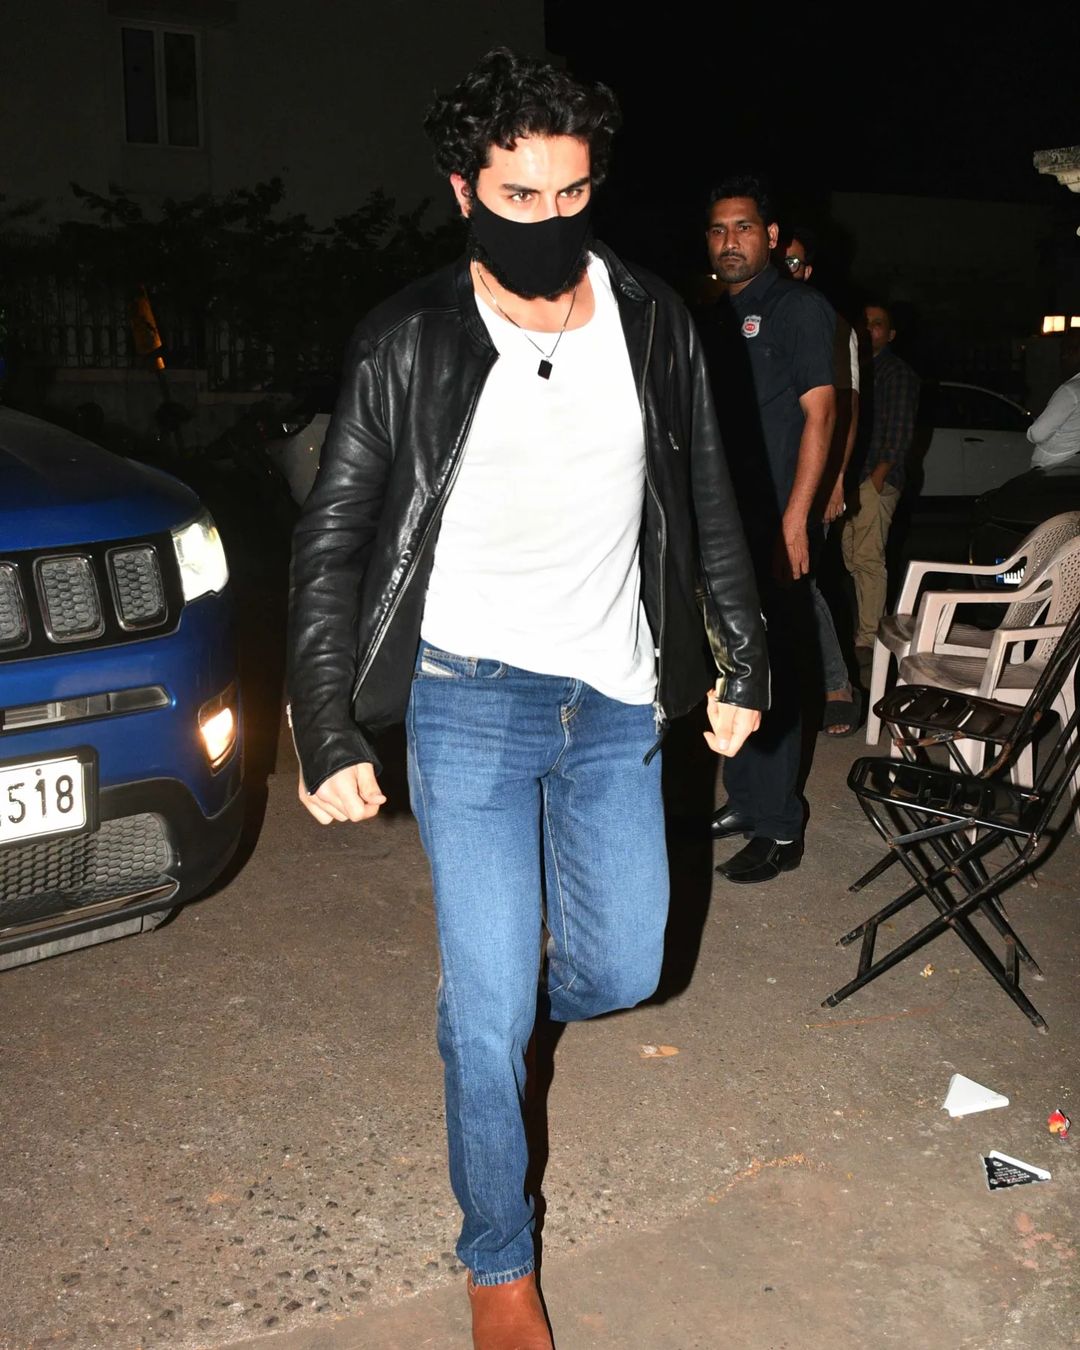 Ibraham Ali Khan Was Seen In A White Tee Blue Denim Jeans And A Black Jacket With Messy Hair